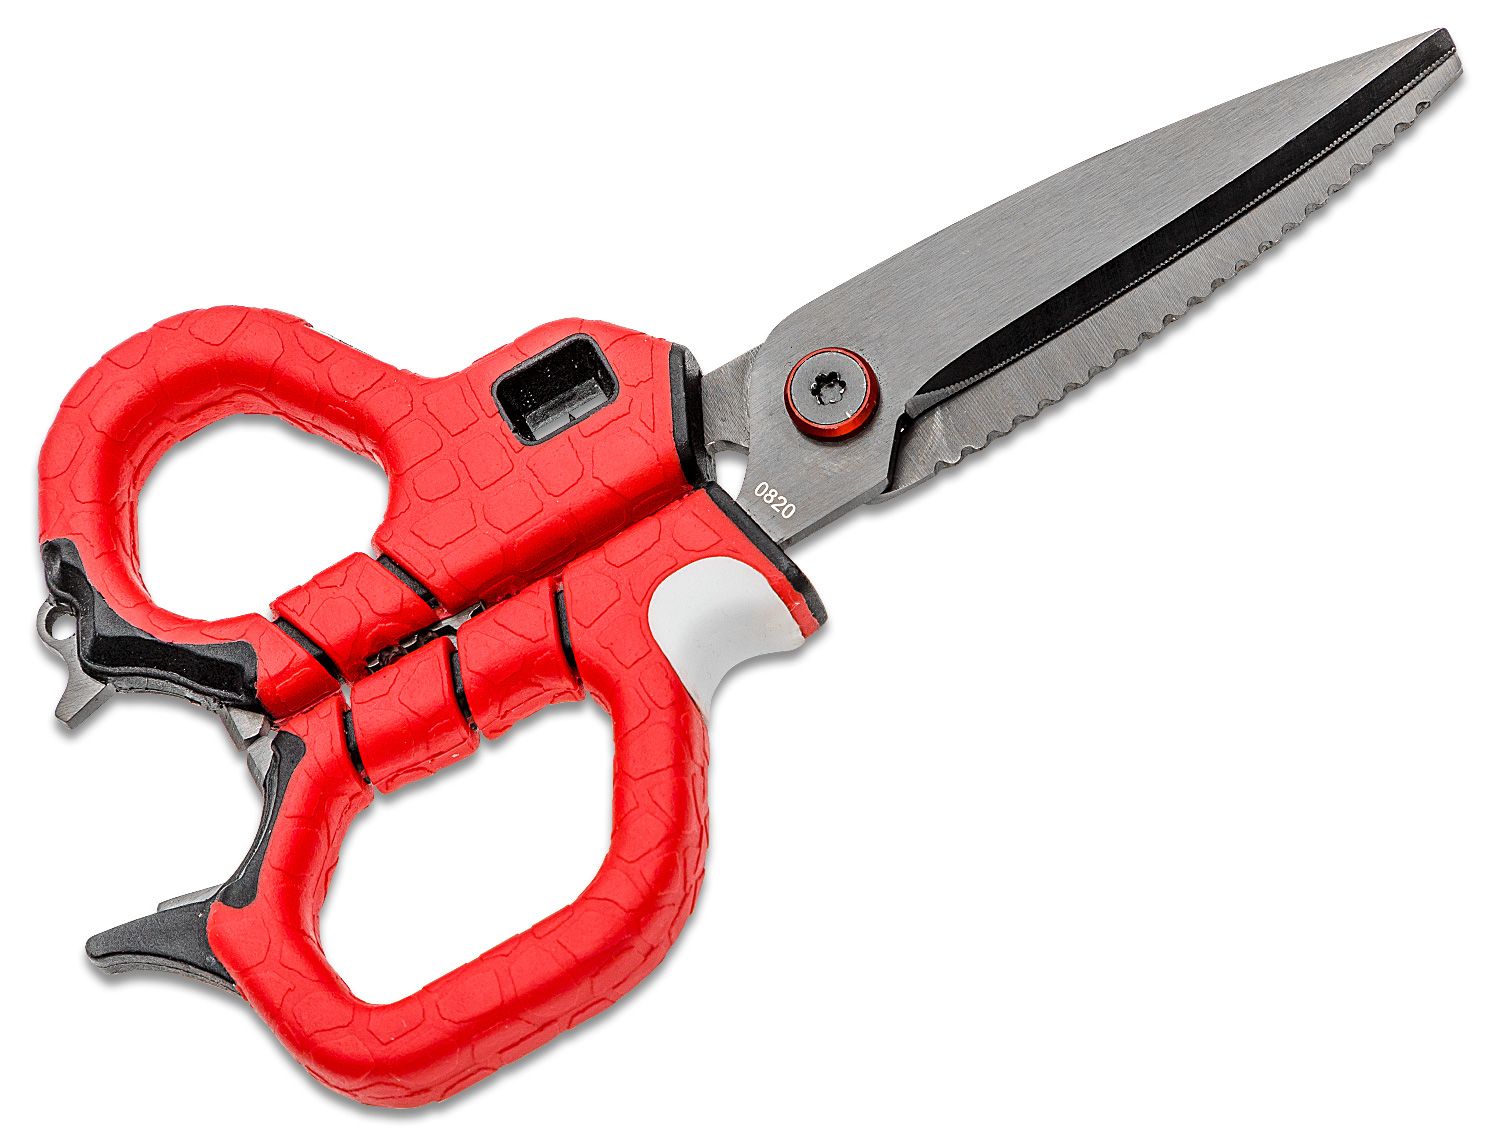 These BUBBA shears help me tie better knots. 